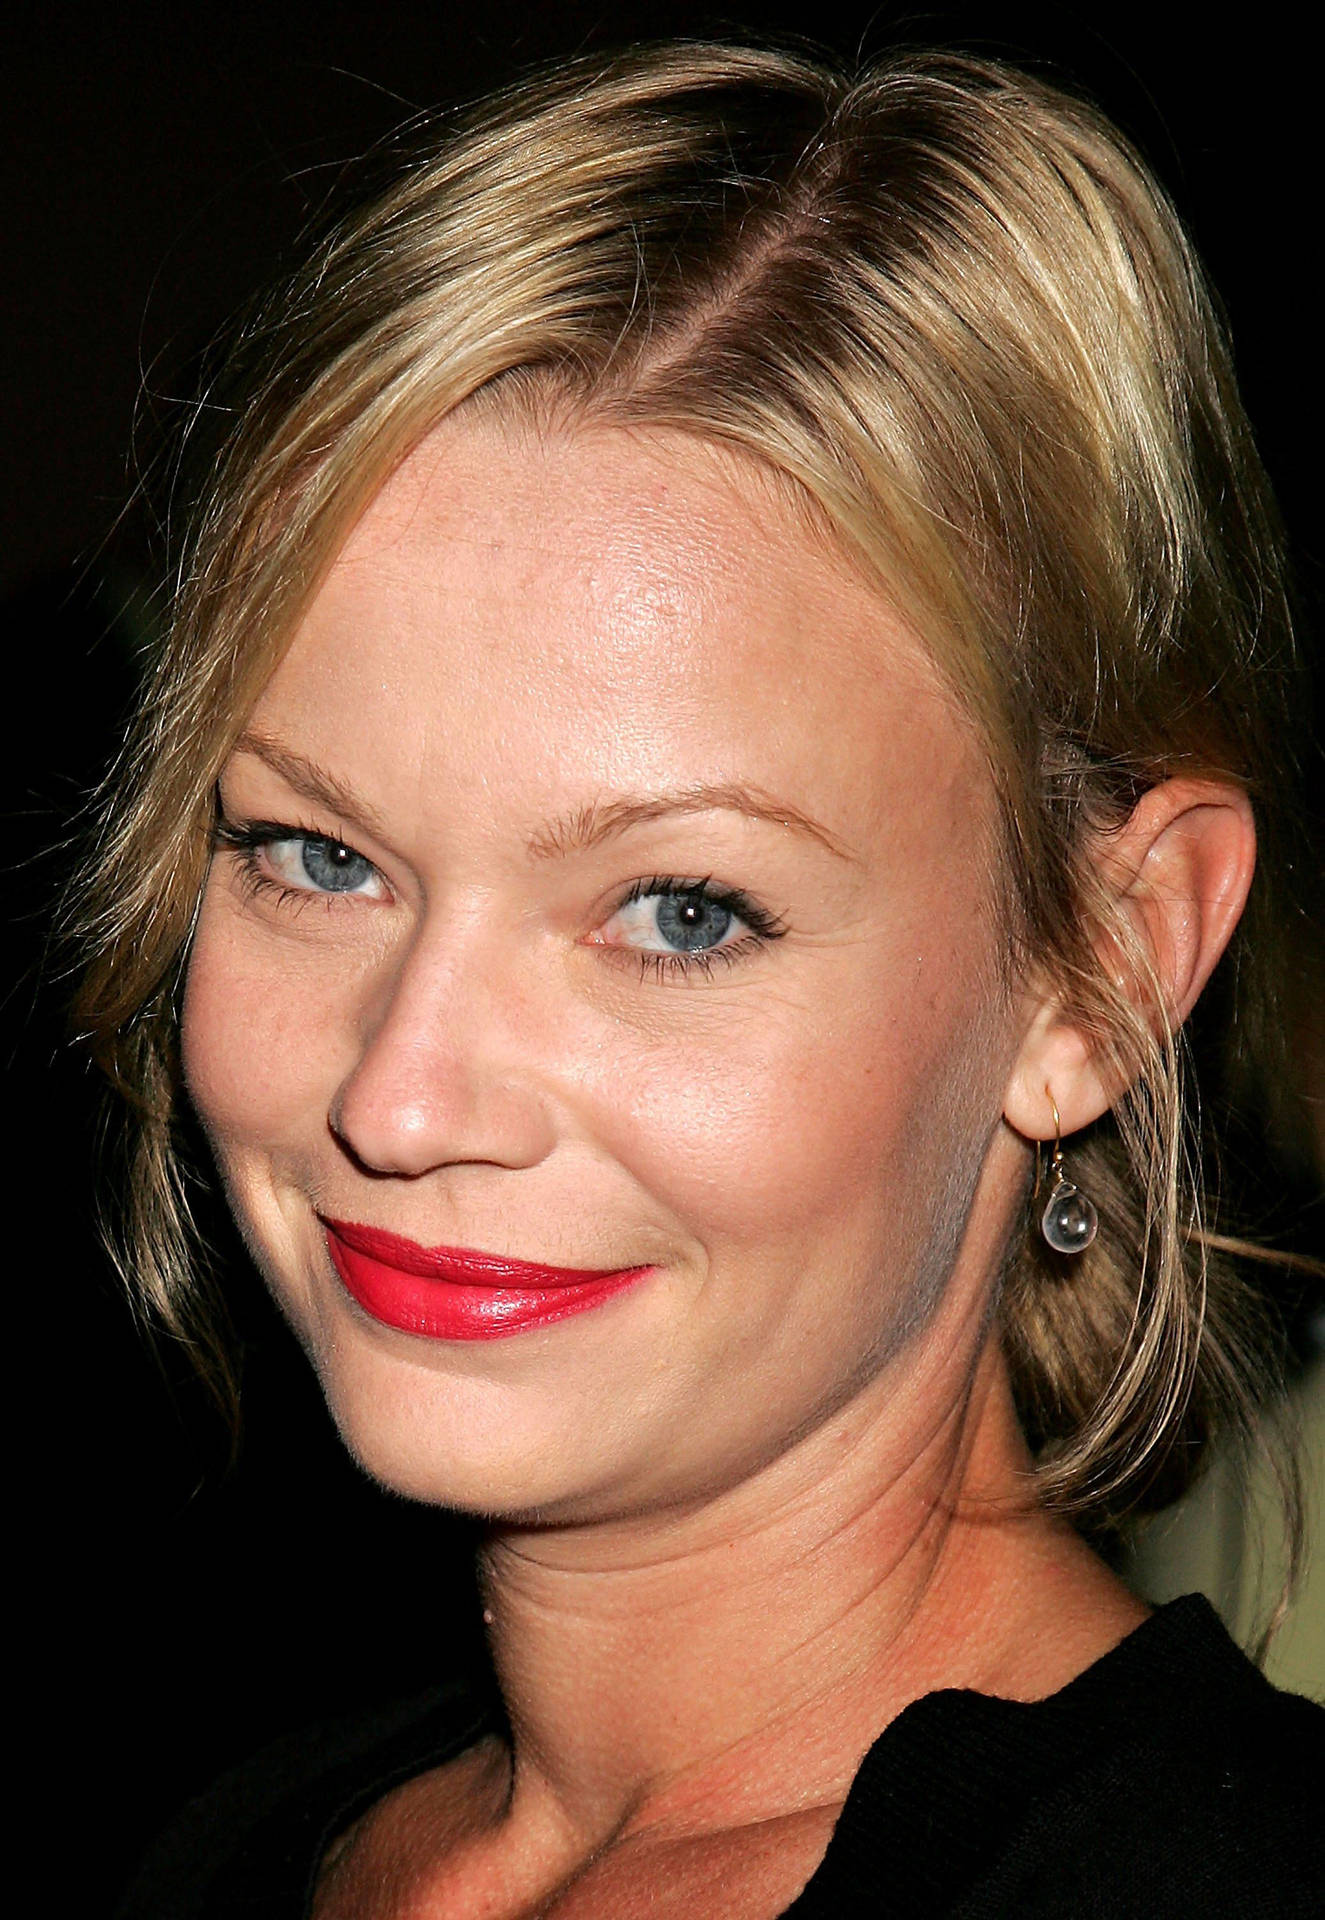 Samanthamathis Rote Lippenstifte Wallpaper